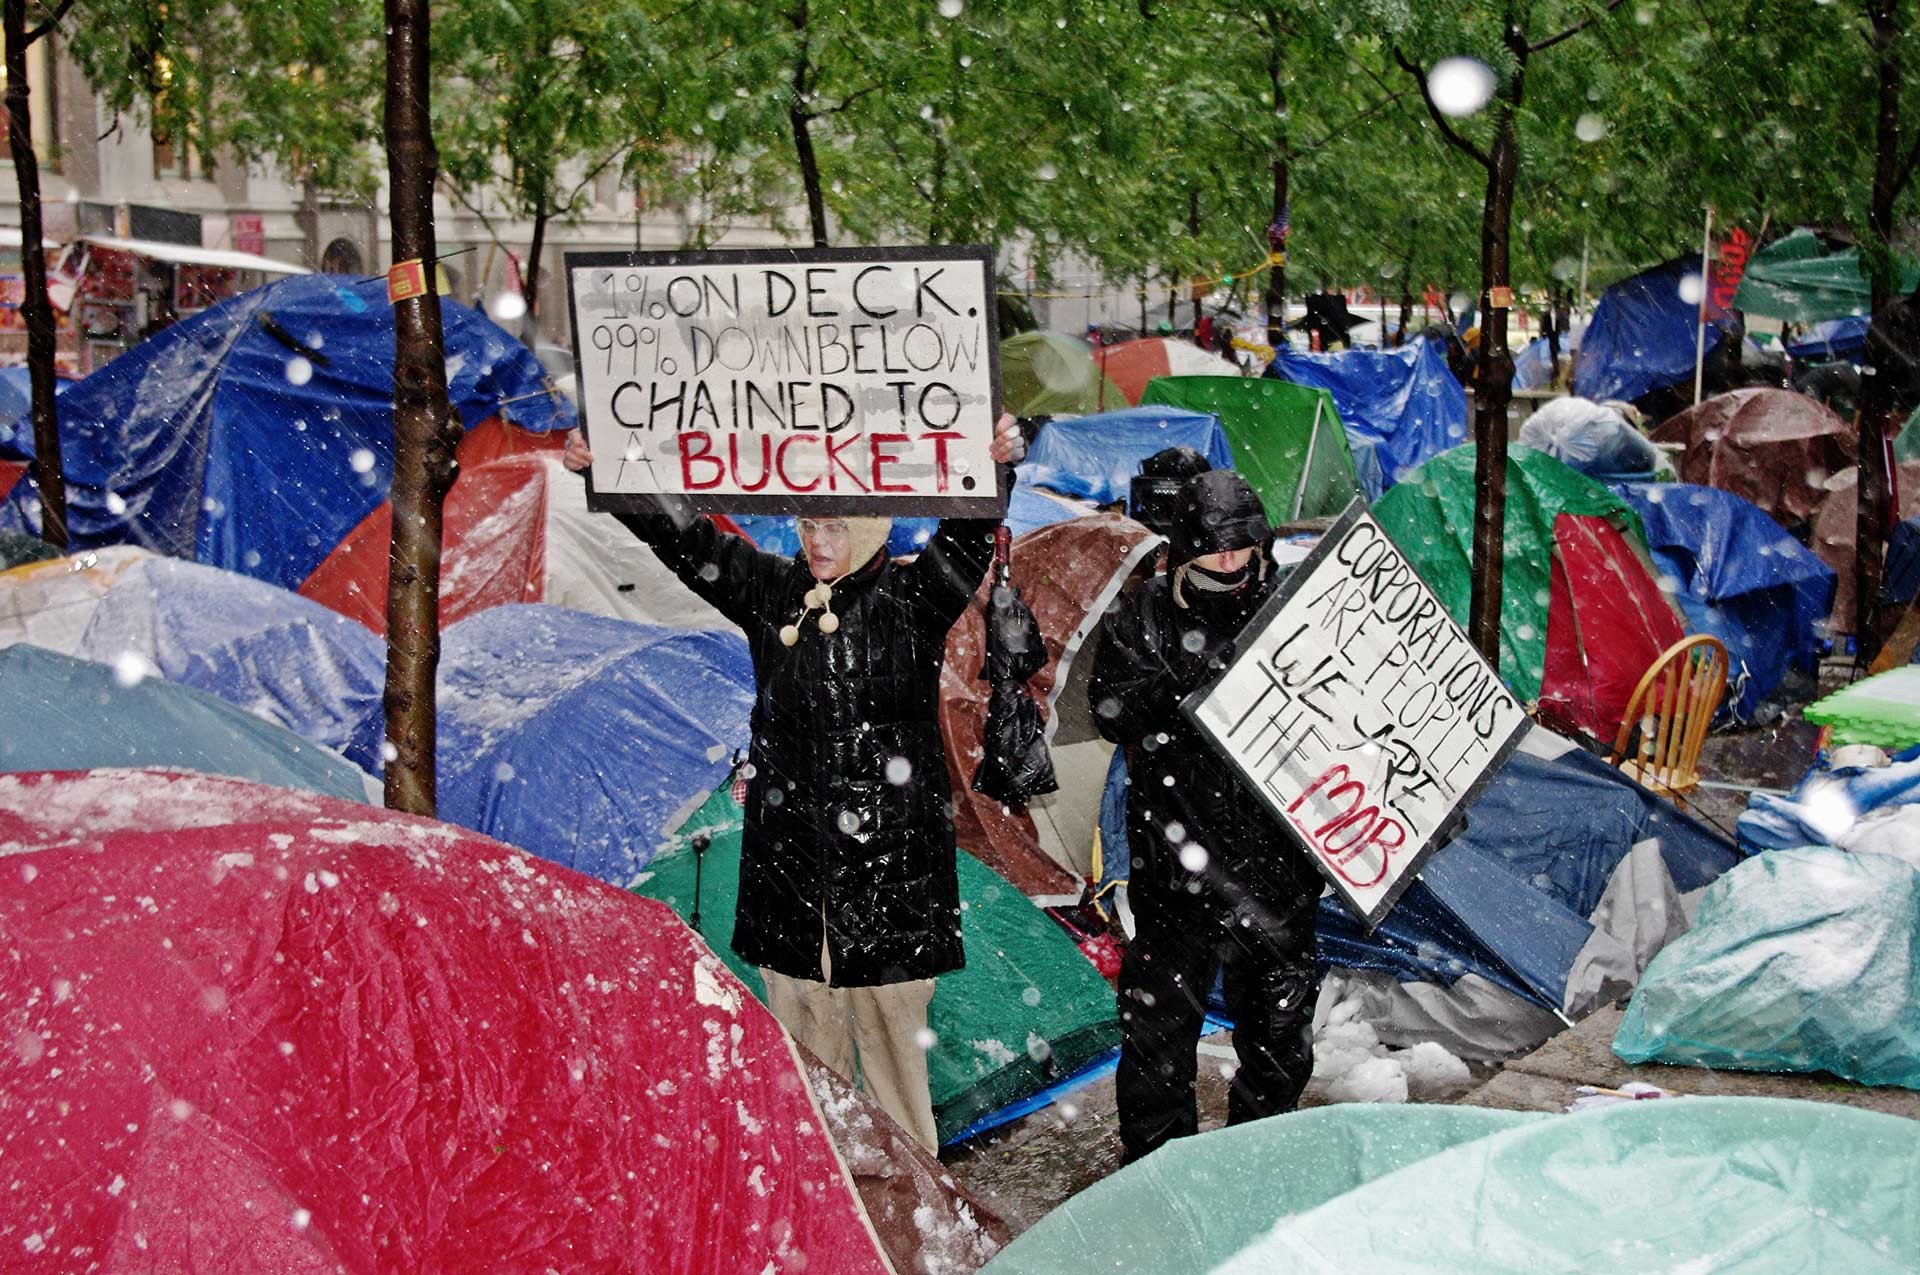 Protesters in snow-covered Zuccotti Park, a square in Manhattan’s financial district. The privately owned public space is controlled by  a company. The protest camp occupied the park for nine weeks and sparked a global protest movement with many other camps. A change in the weather transformed the camp from a radically open structure without any shelter from the elements into a dense city of private tents.